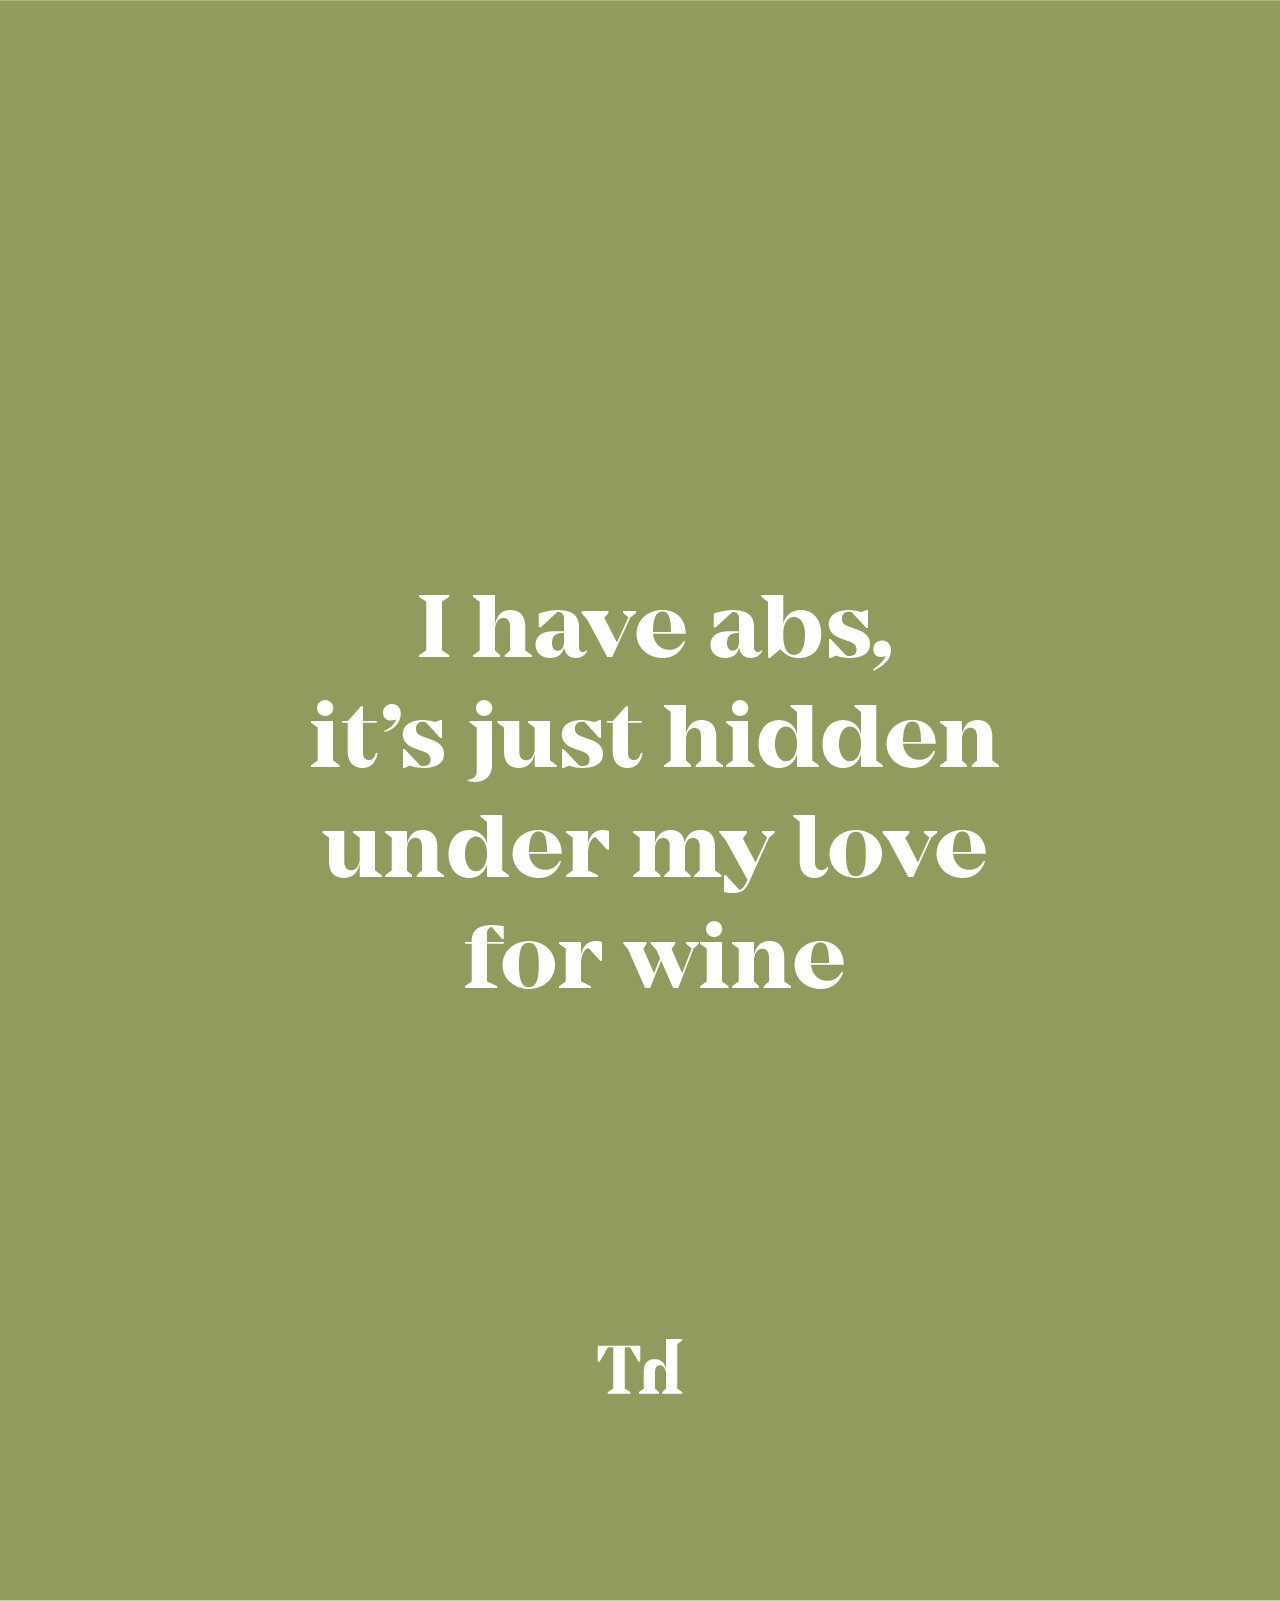 Should we drink wine tonight? 🤔⁣
A) Yes 🍷⁣
B) A 🍷⁣
C) B 🤫